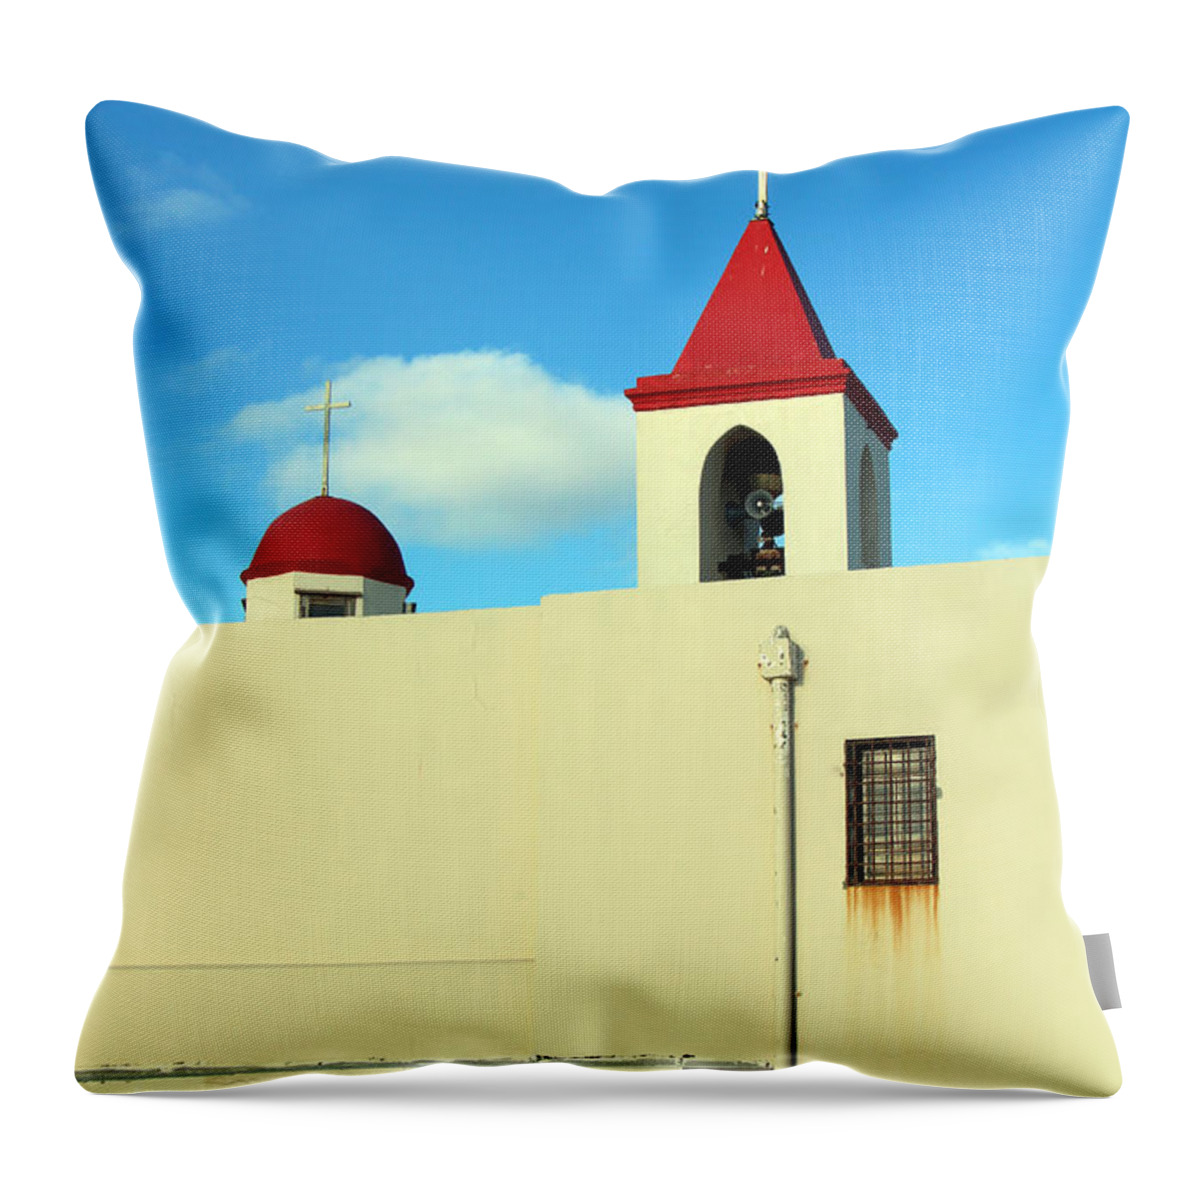 Acre Throw Pillow featuring the photograph Acre Church by Munir Alawi